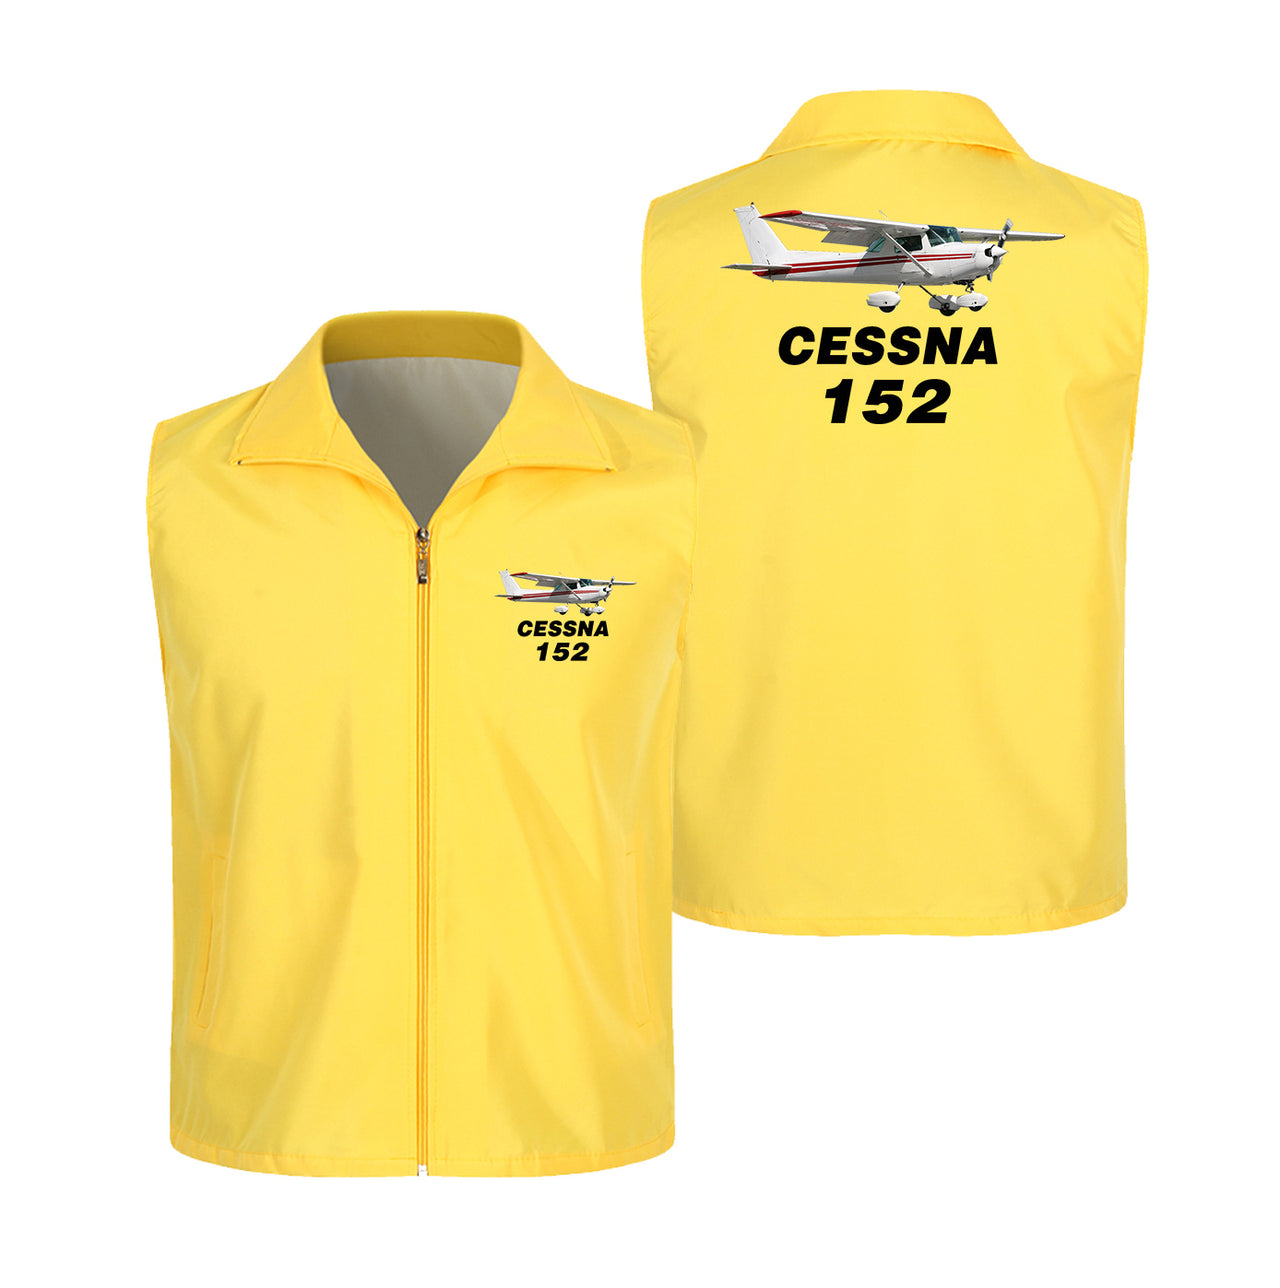 The Cessna 152 Designed Thin Style Vests